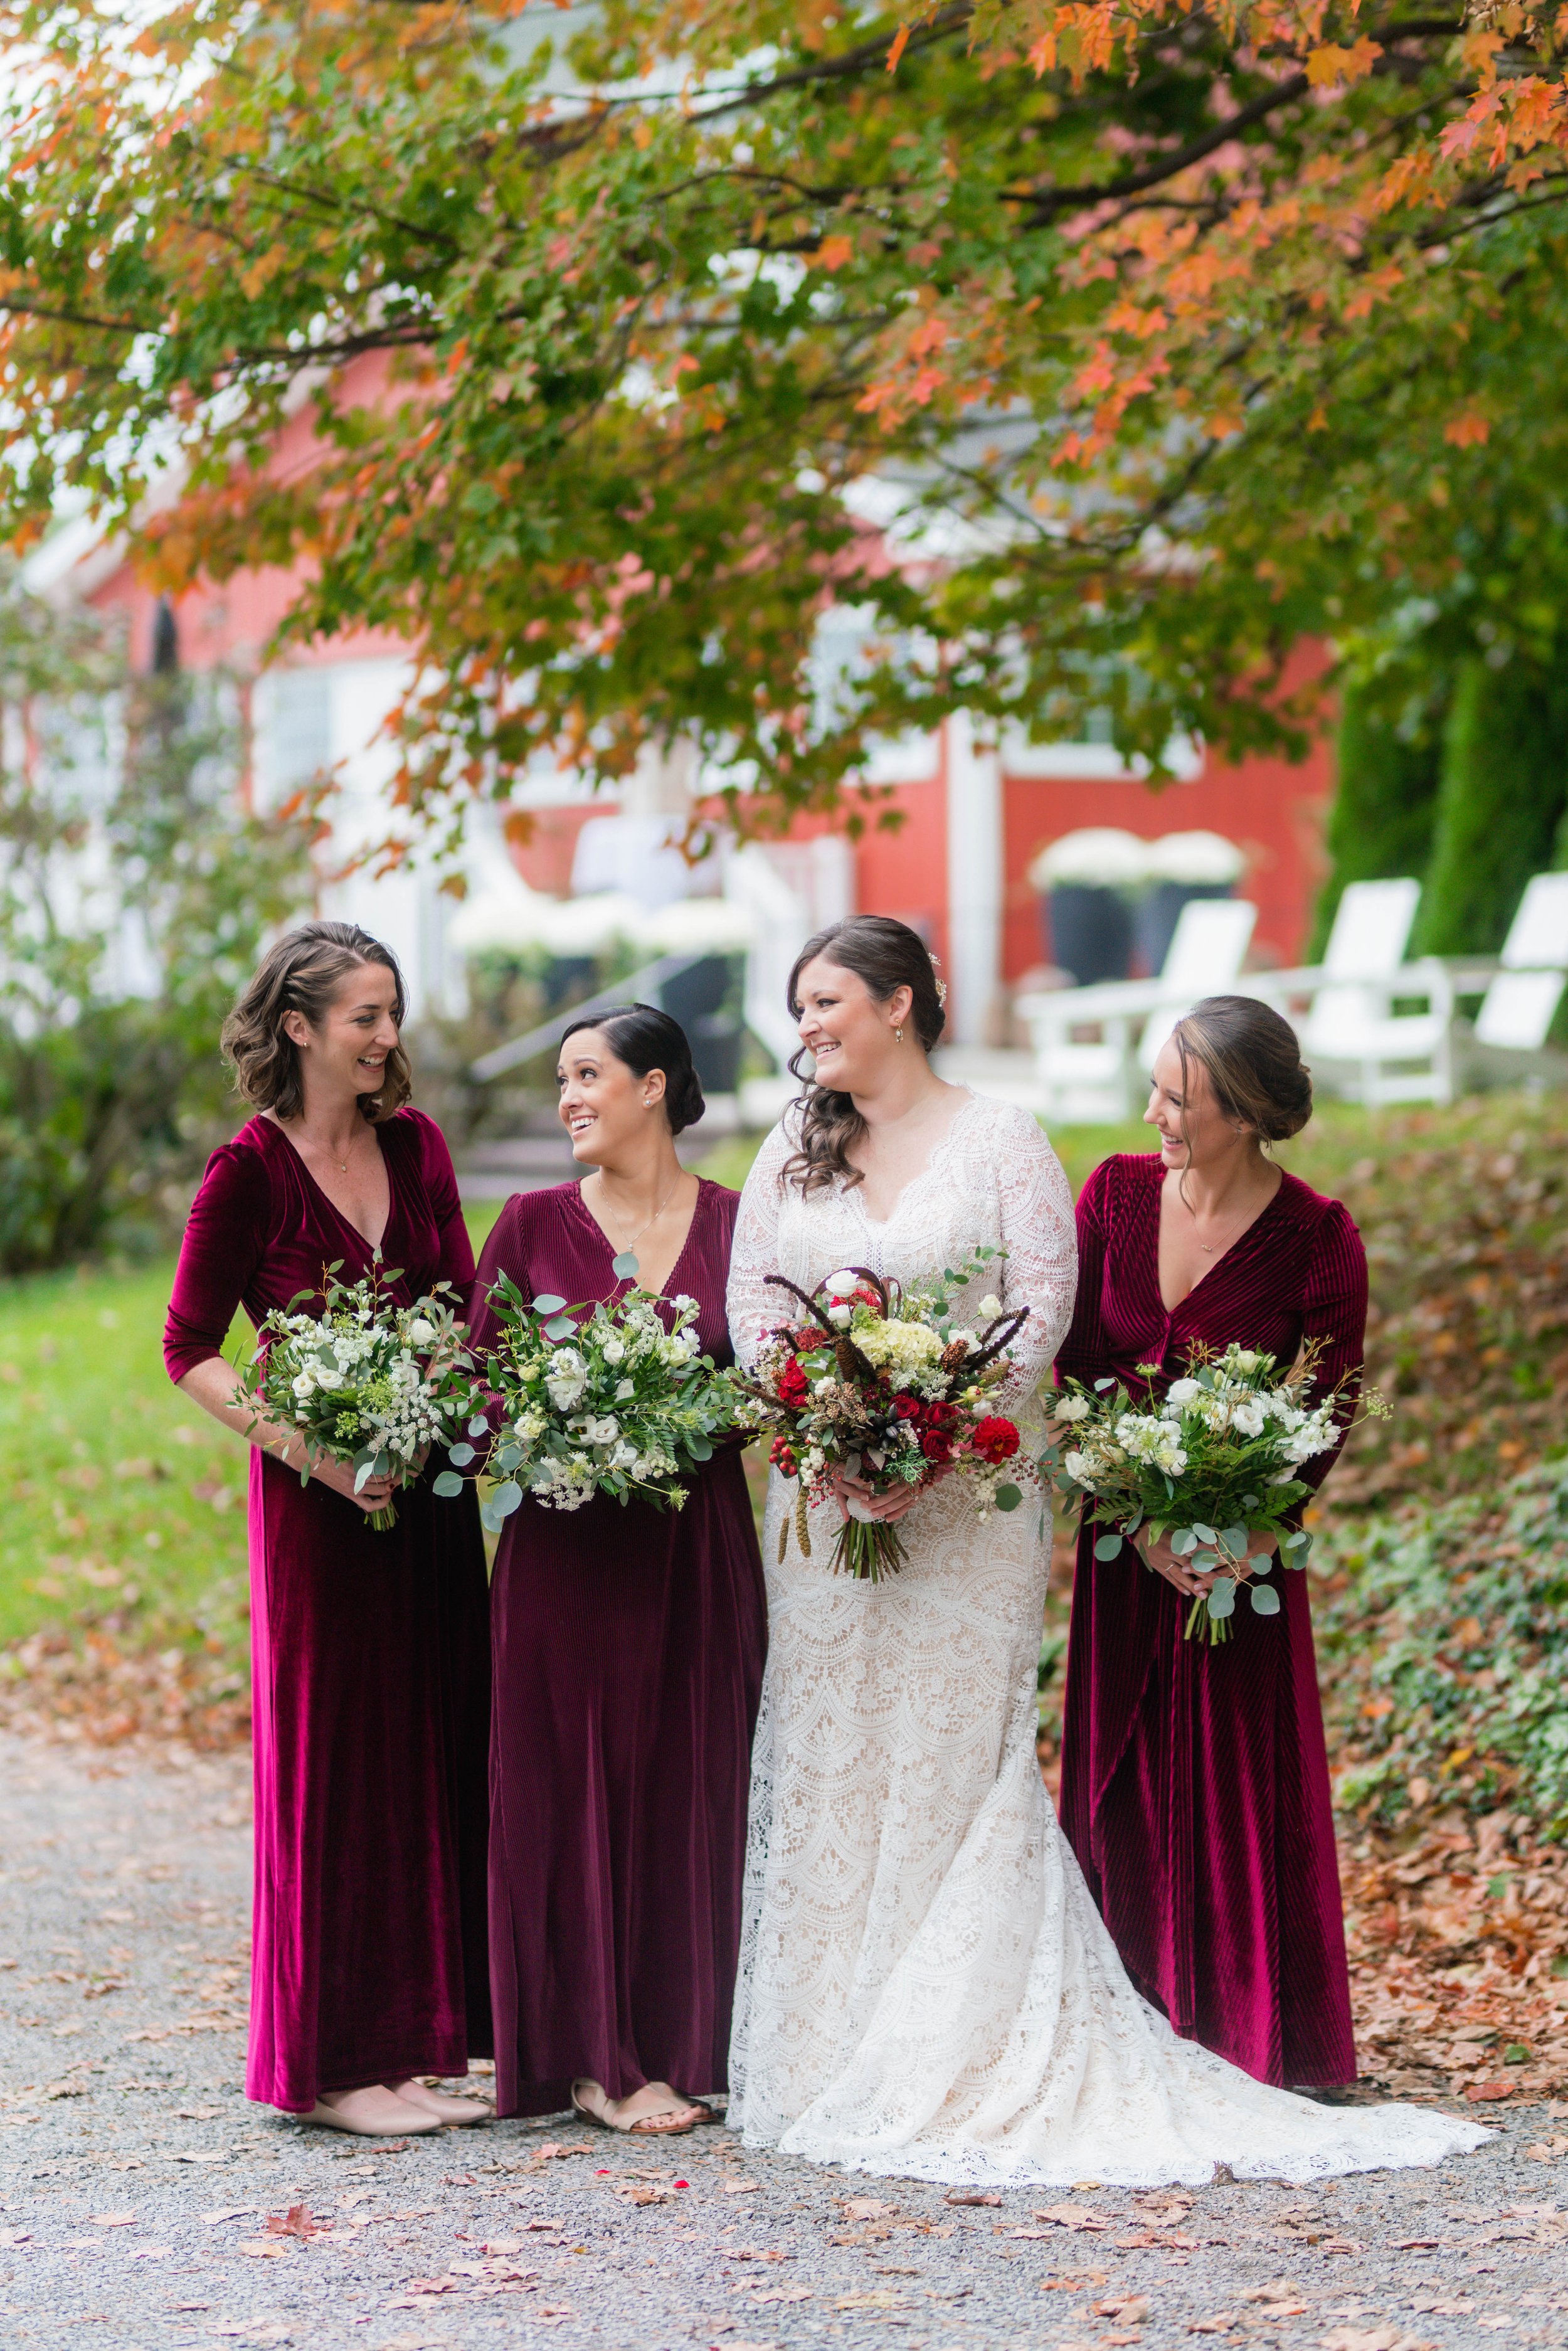  bridal party featuring wtoo wedding dress from aandbe bridal shop 